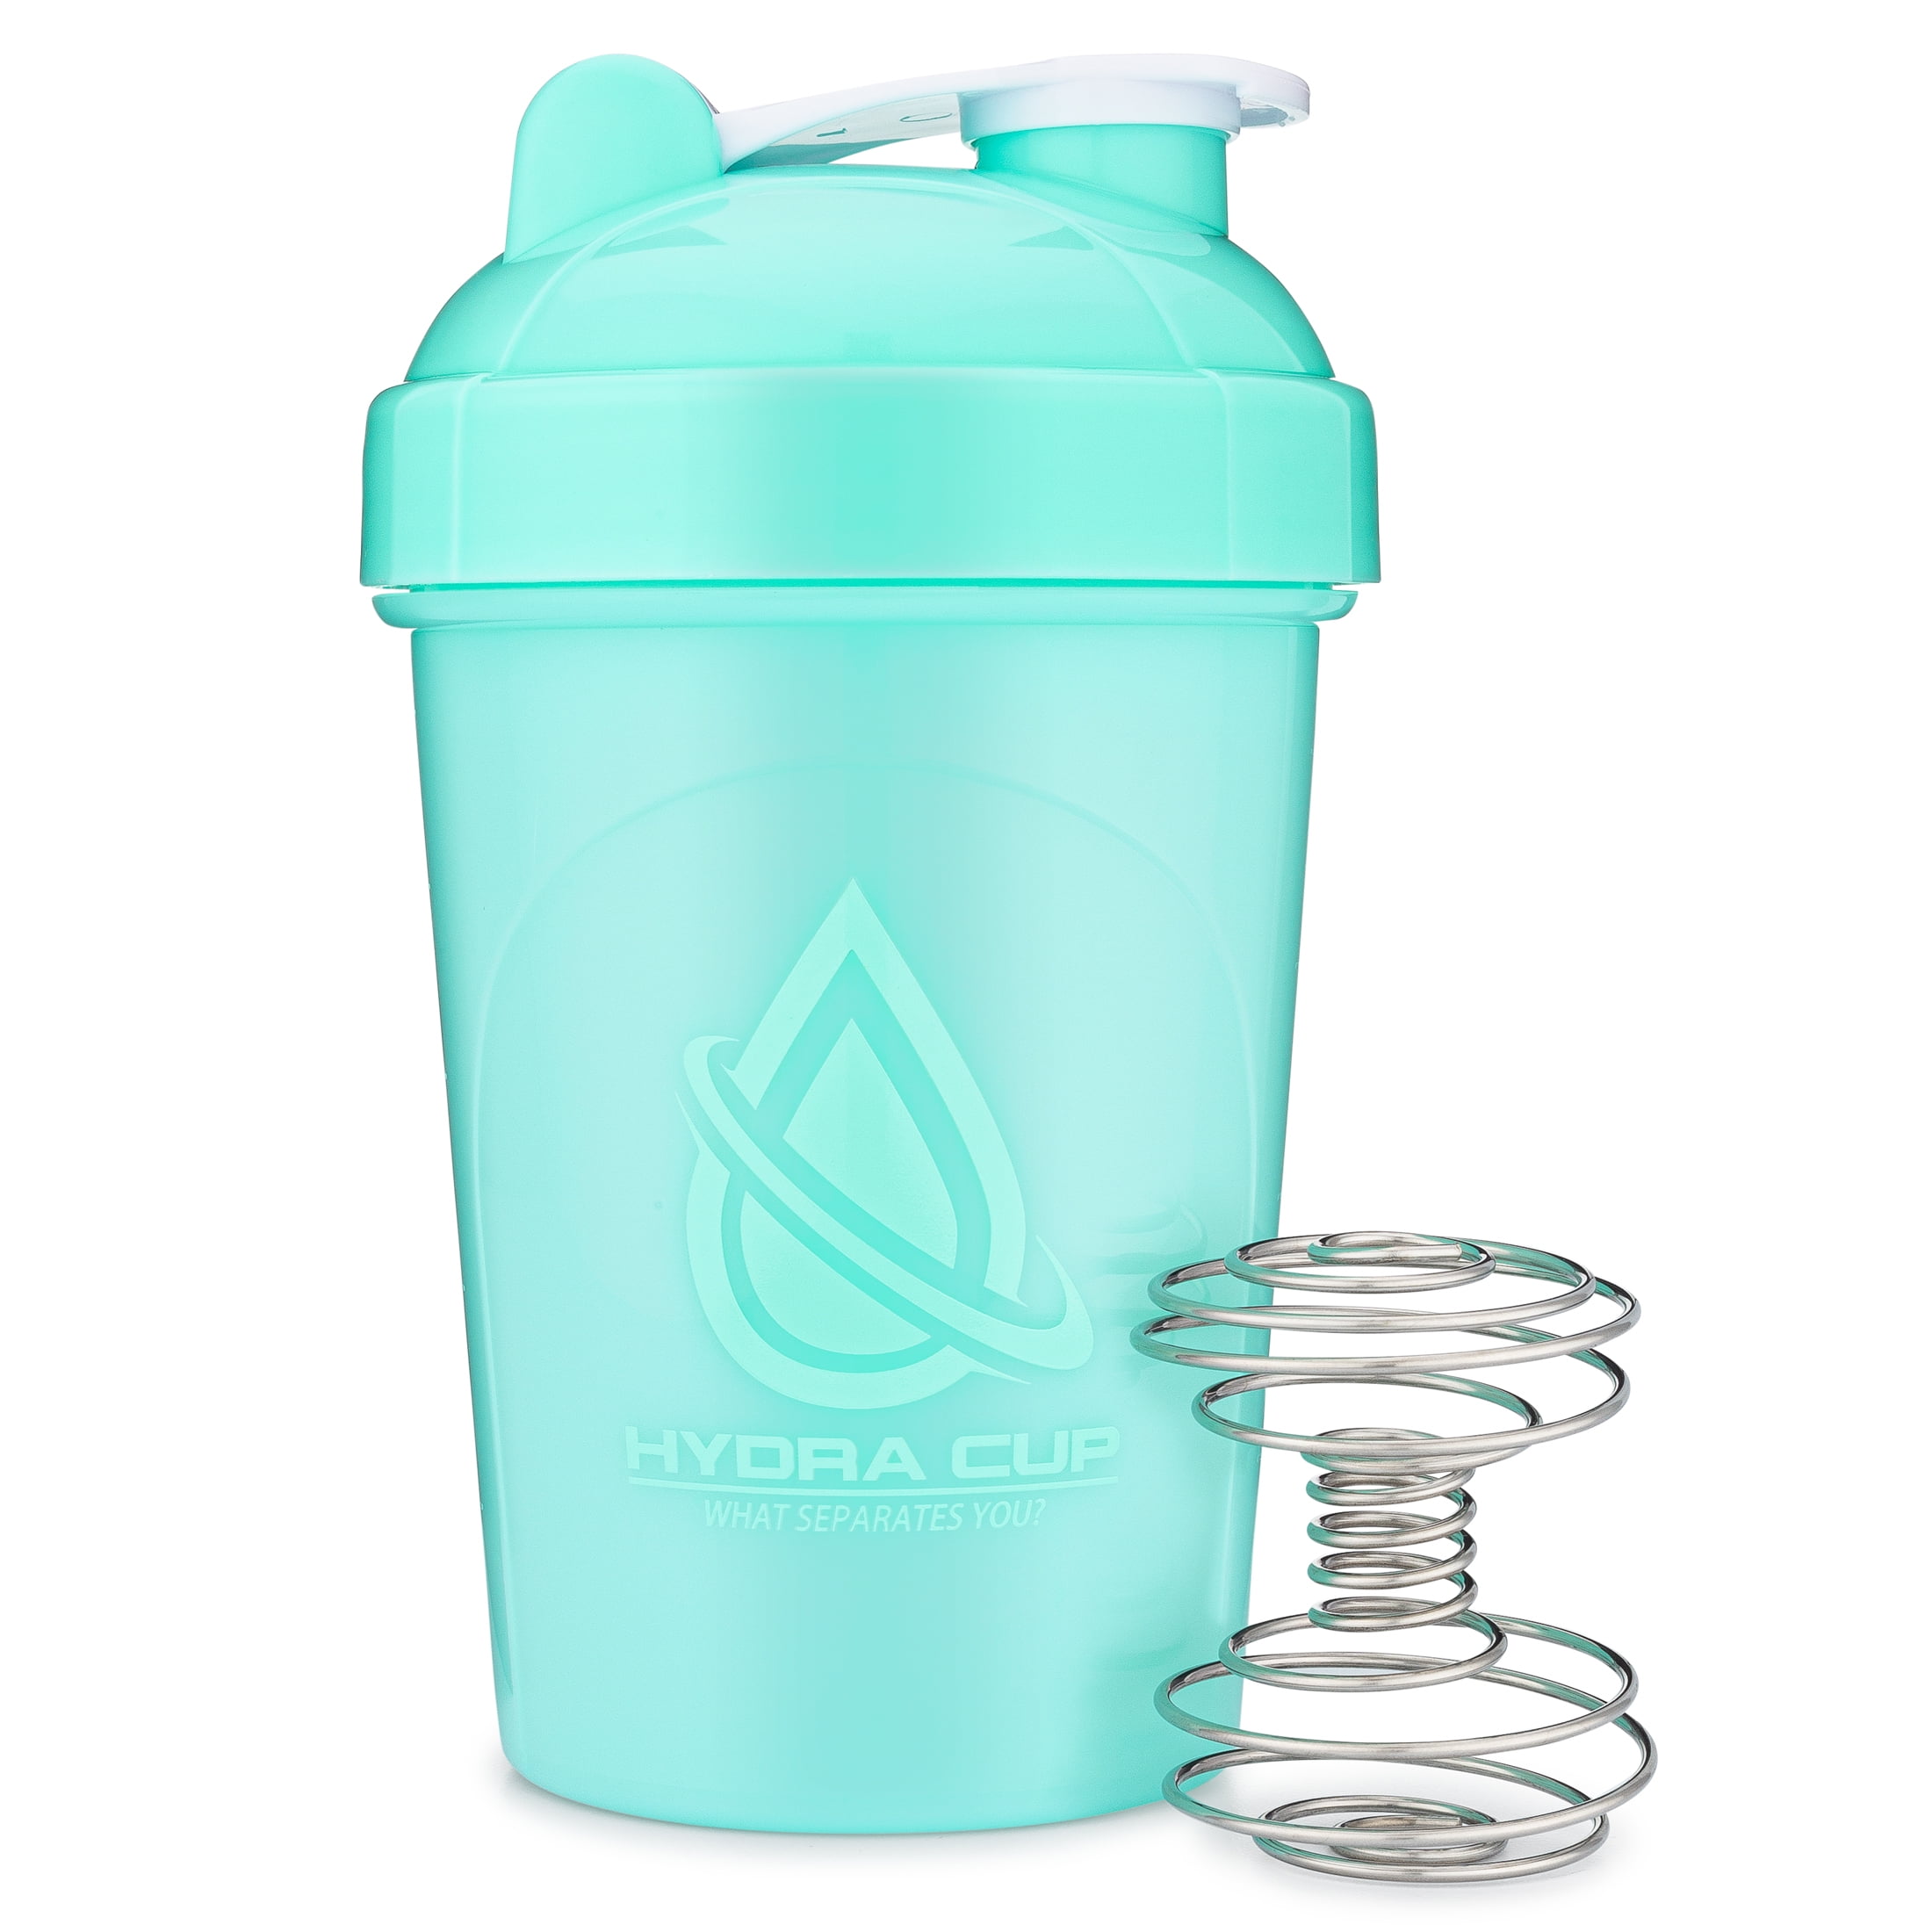 Hydra Cup [4 Pack] - 32oz Squeeze Water Bottles, Monochromatic Color Scheme Set, Use As Shaker Cups with Wire Whisk Blender, Sport & Bike Hydration, P